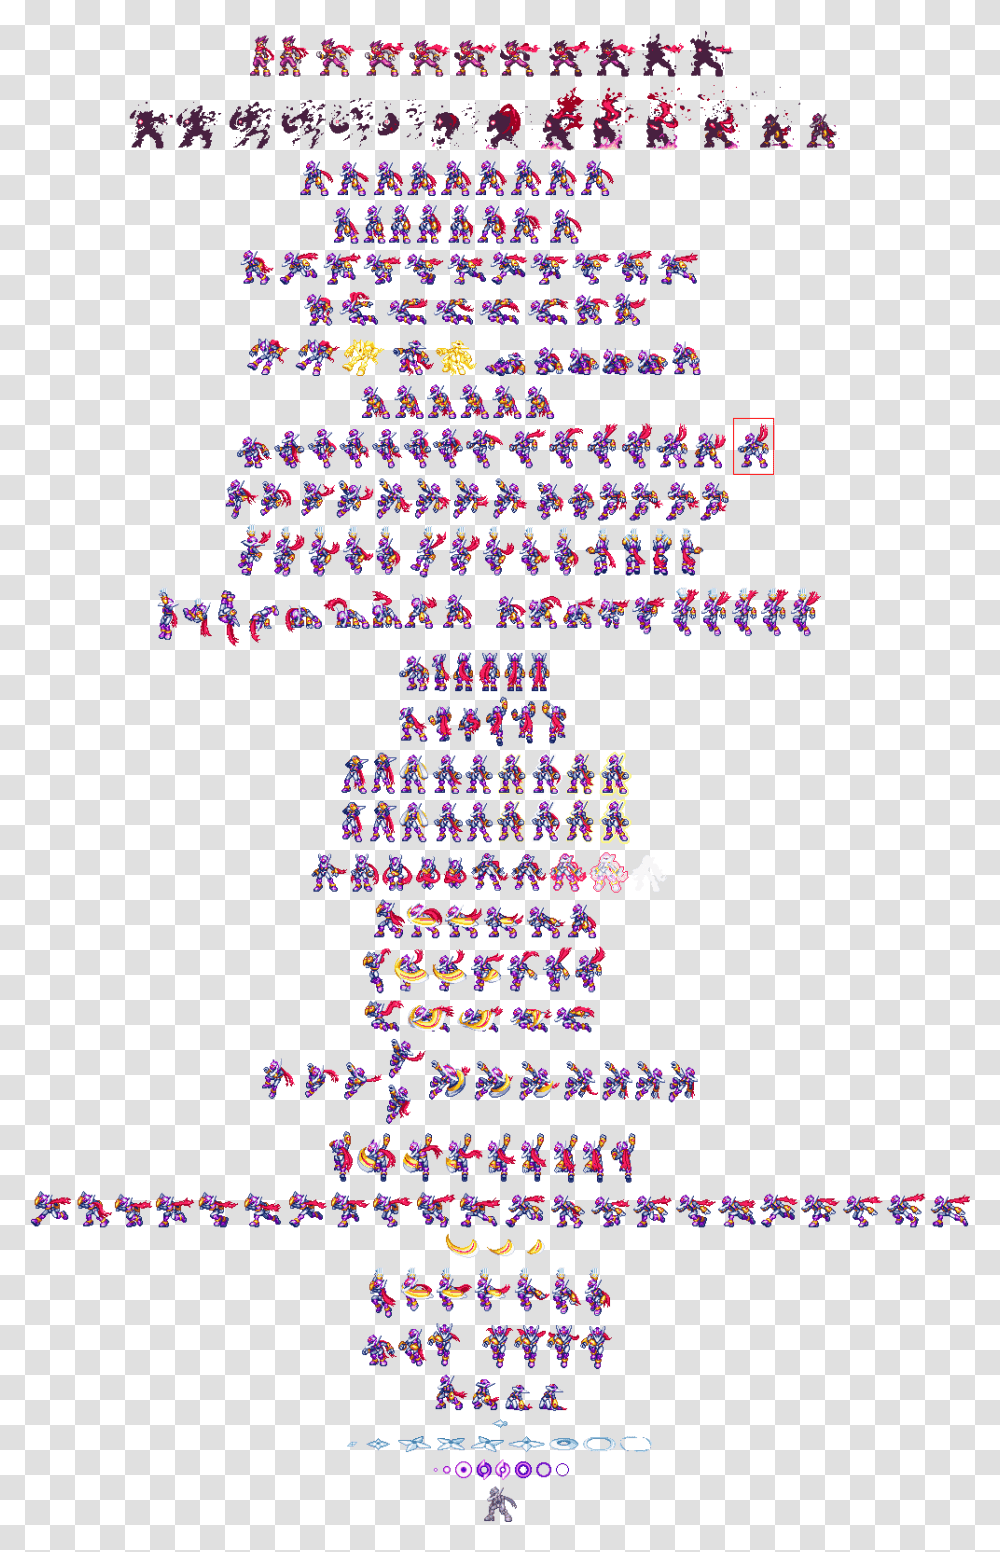 Was A Lazy Andor Forgetful Person And Didnquott Finish Megaman Zx Advent Model A Sprites, Super Mario, Word, Pac Man Transparent Png